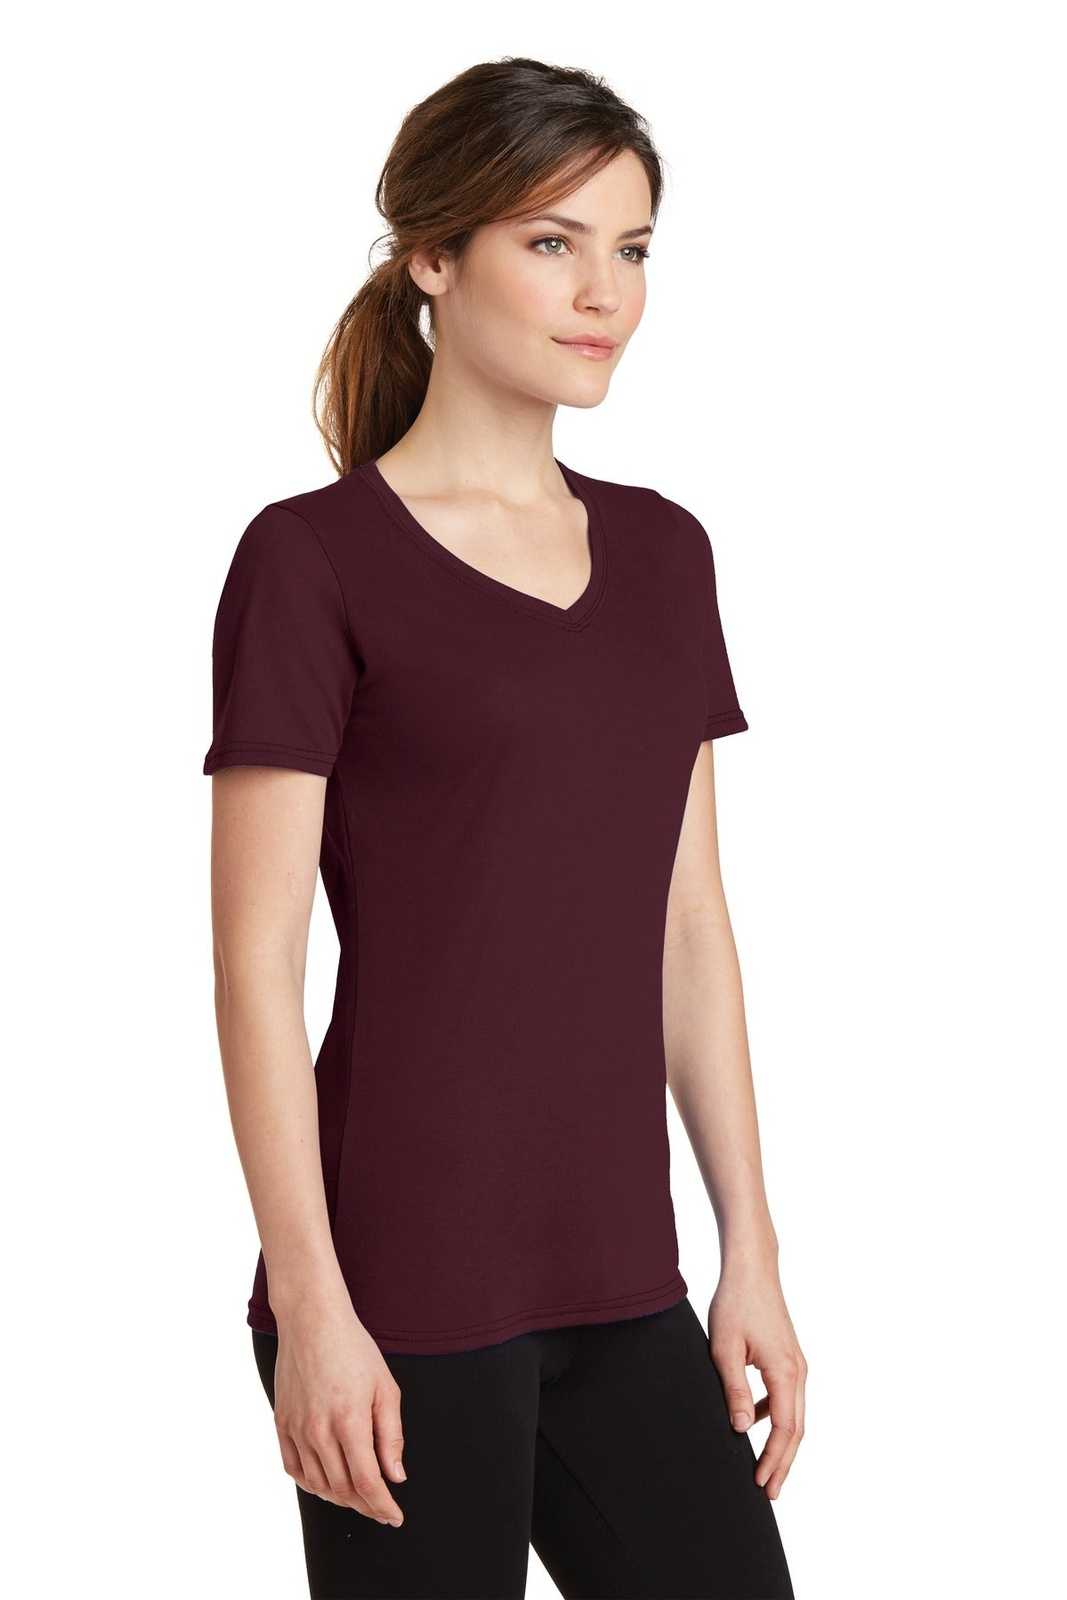 Port &amp; Company LPC381V Ladies Performance Blend V-Neck Tee - Athletic Maroon - HIT a Double - 4